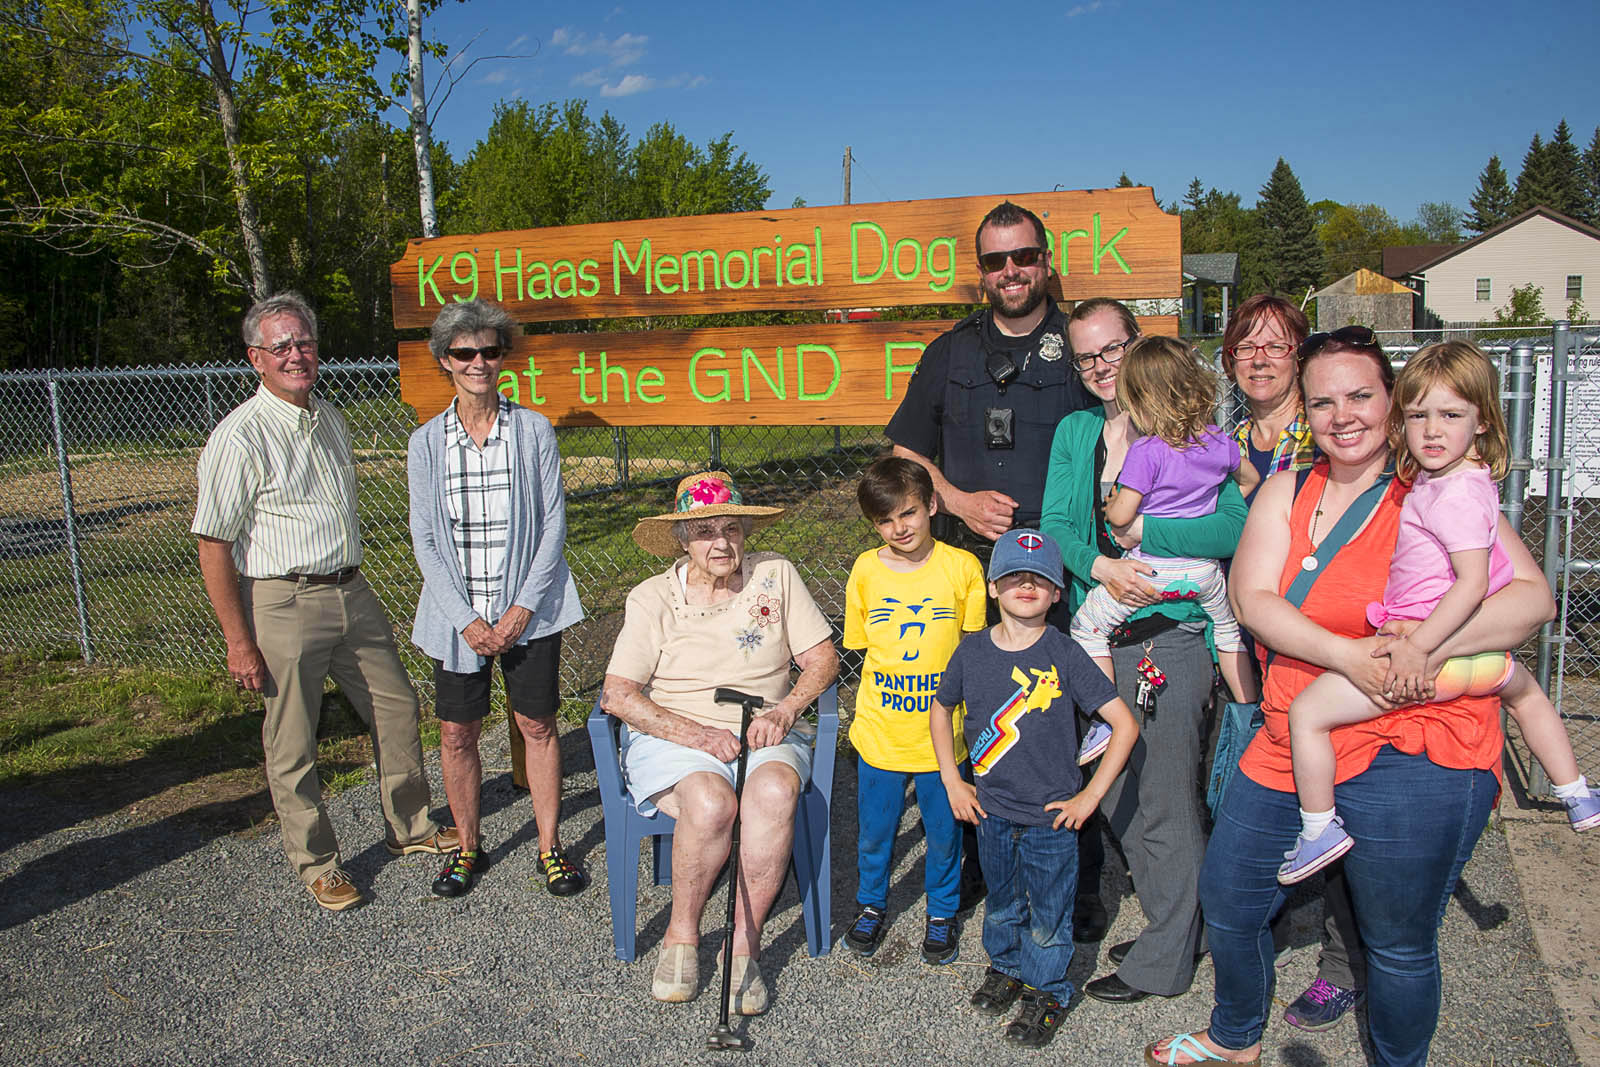 A group of people smile in front of a sign that says K9 Haas Memorial Dog Park at the GND REC